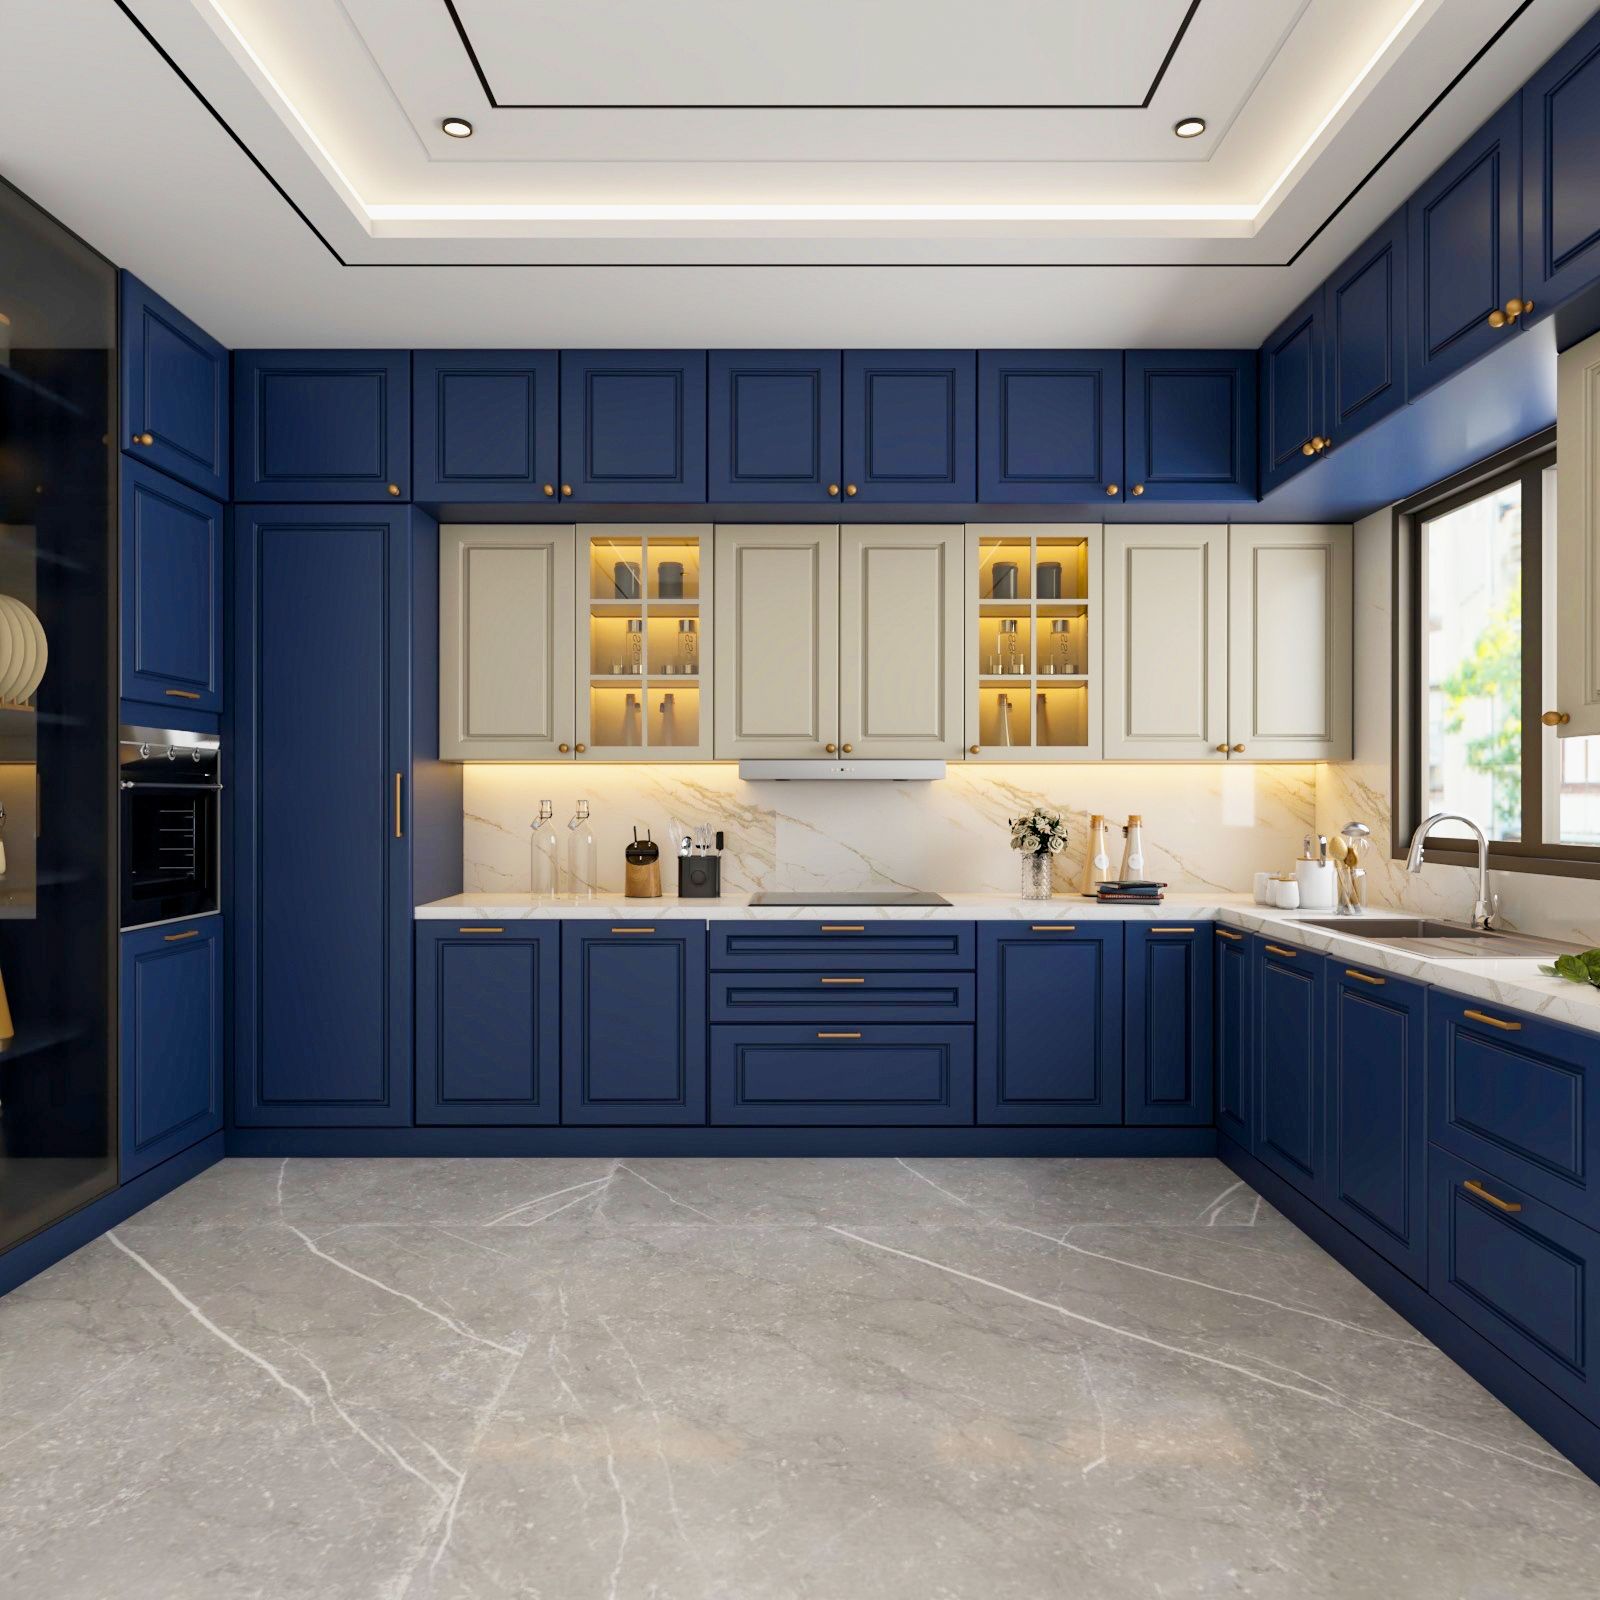 Classic Blue And Cream-Toned U-Shaped Kitchen Design With Marble Dado Tiles